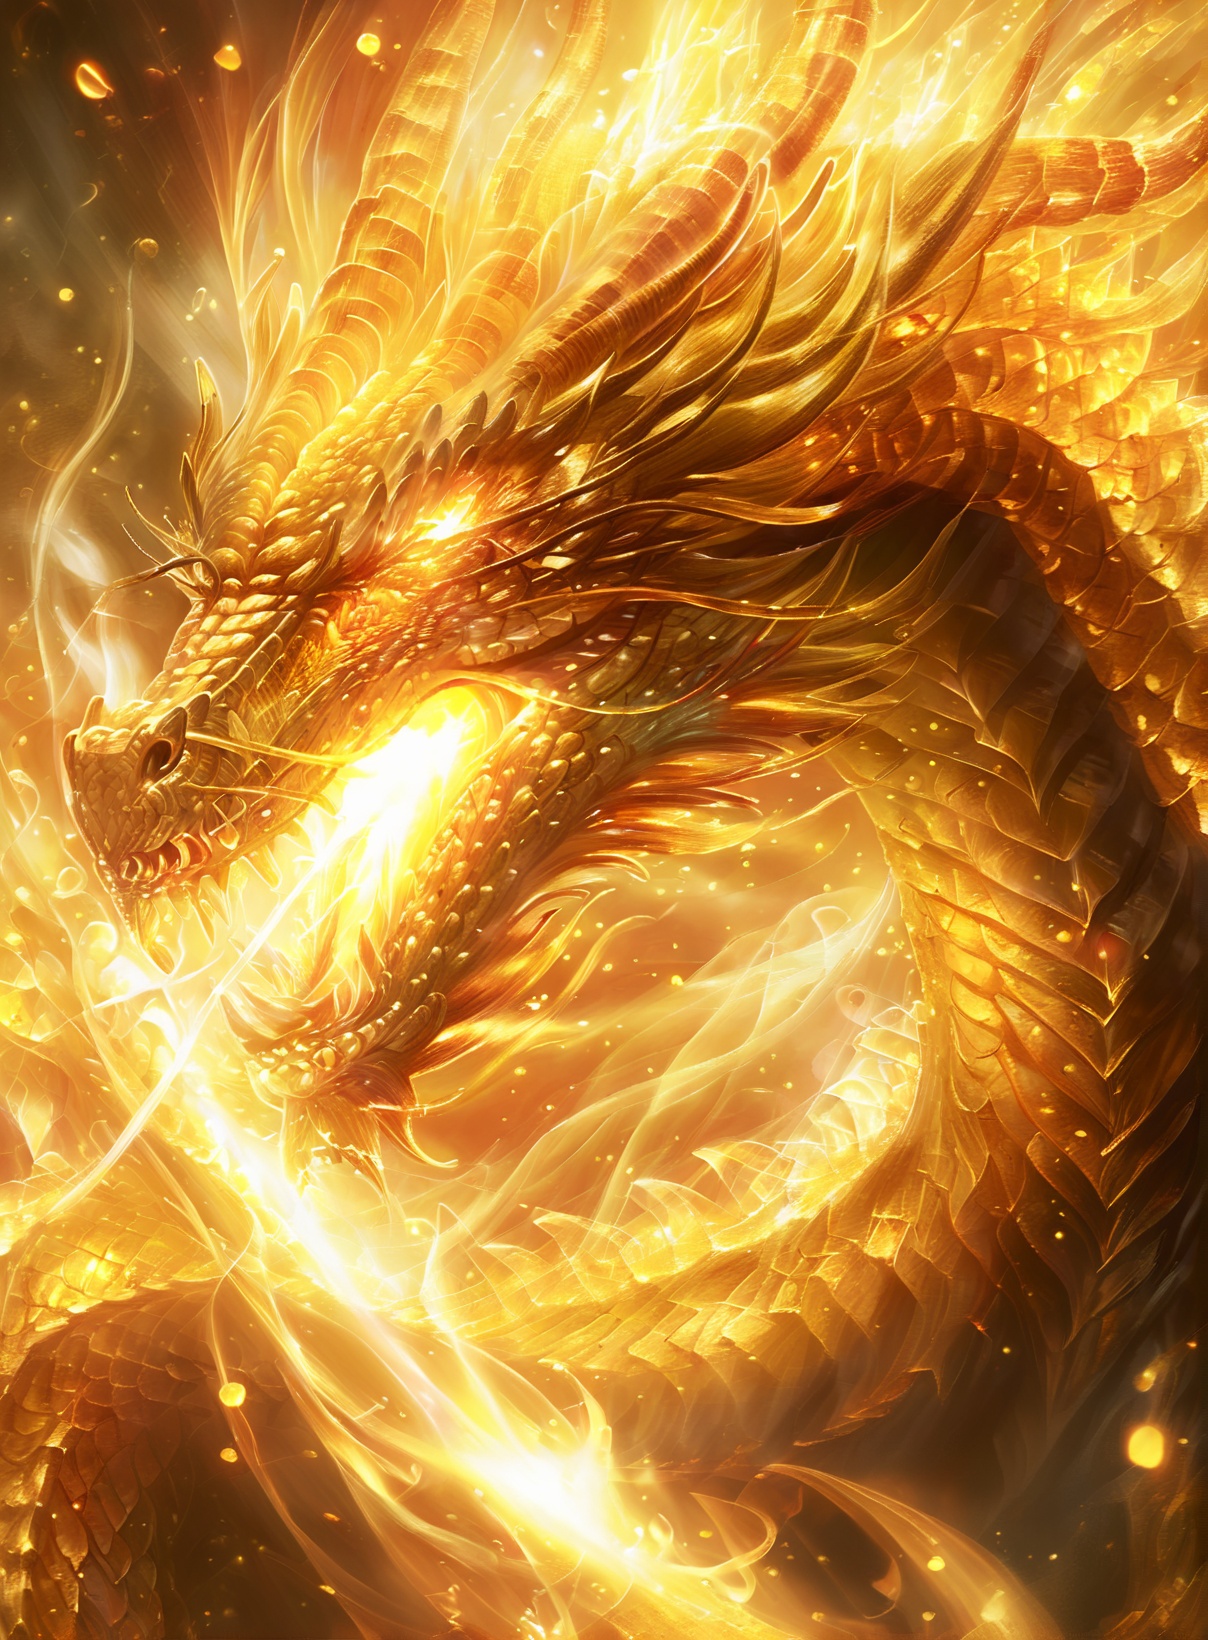 a majestic, fiery dragon with intricate scales and a fiery aura. The dragon's eyes are glowing with a bright, intense light, and its mouth is open, revealing sharp teeth. The background is filled with swirling flames and embers, creating a sense of movement and intensity. The overall color palette is dominated by warm hues of gold, orange, and yellow, giving the image a fiery and dynamic feel<lora:KING Gardon-000010:1>